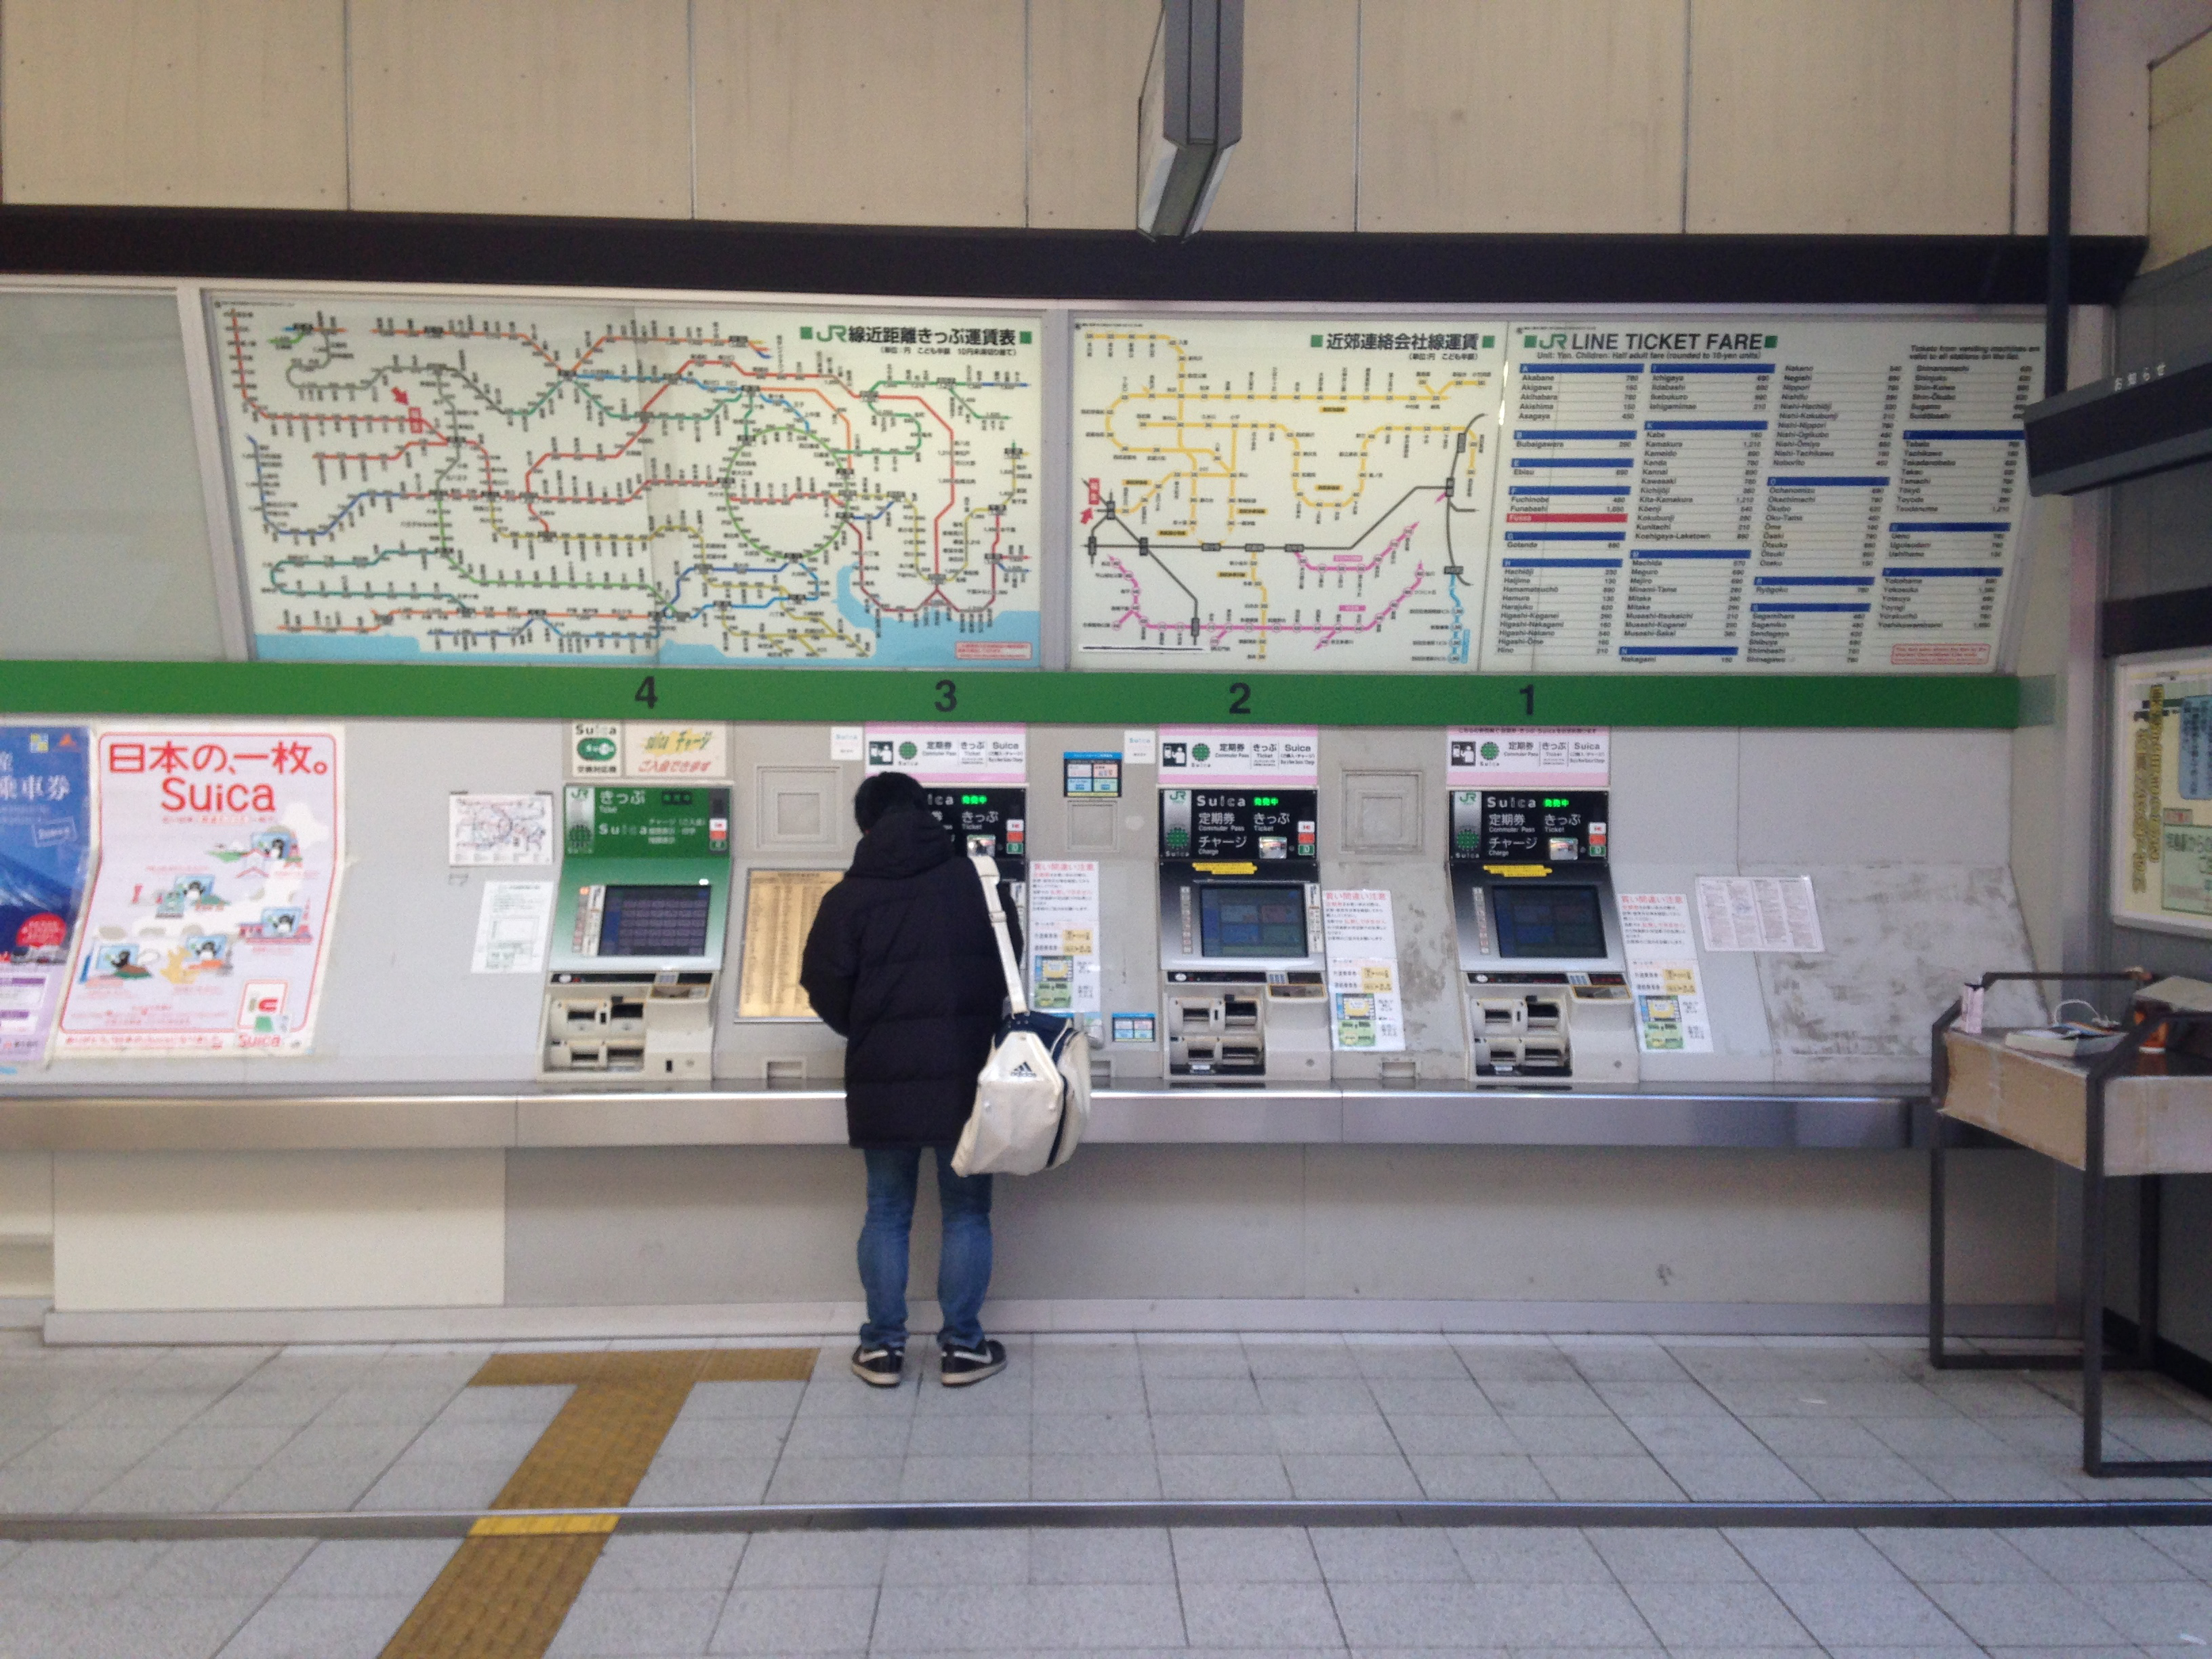 How to ride Local trains in Japan